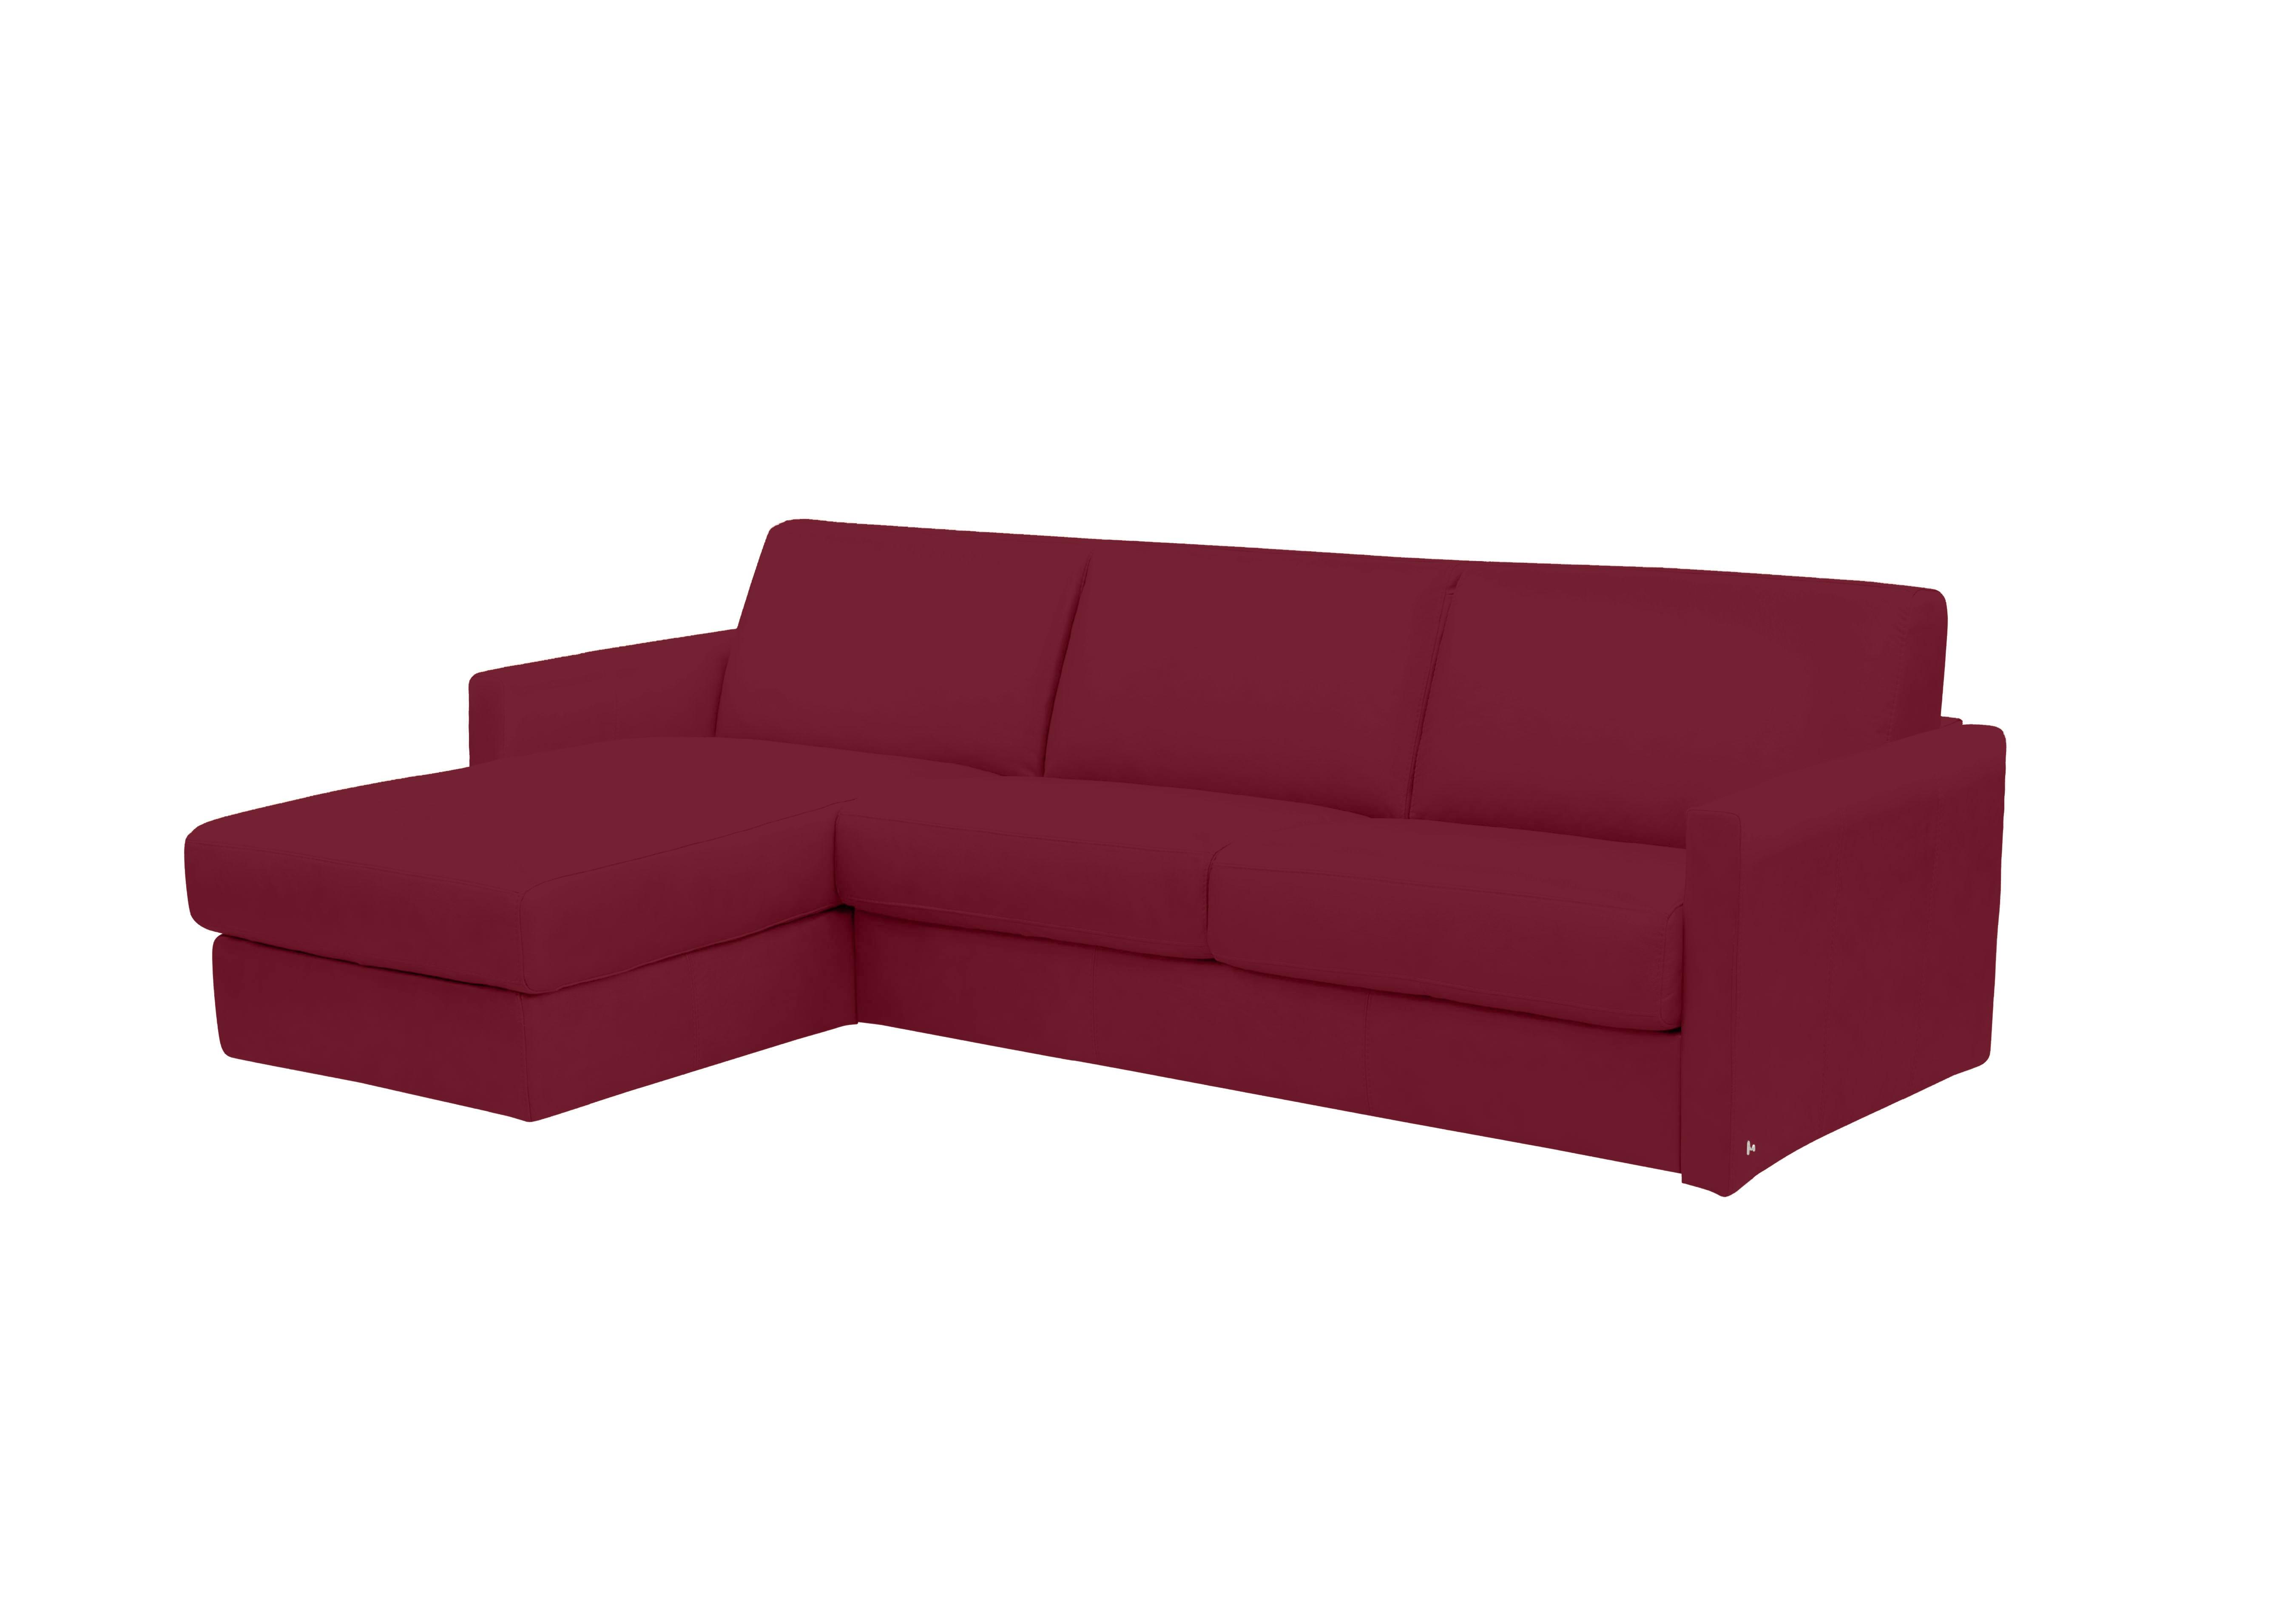 Alcova 3 Seater Leather Sofa Bed with Storage Chaise and Slim Arms in Dali Bordeaux 1521 on Furniture Village